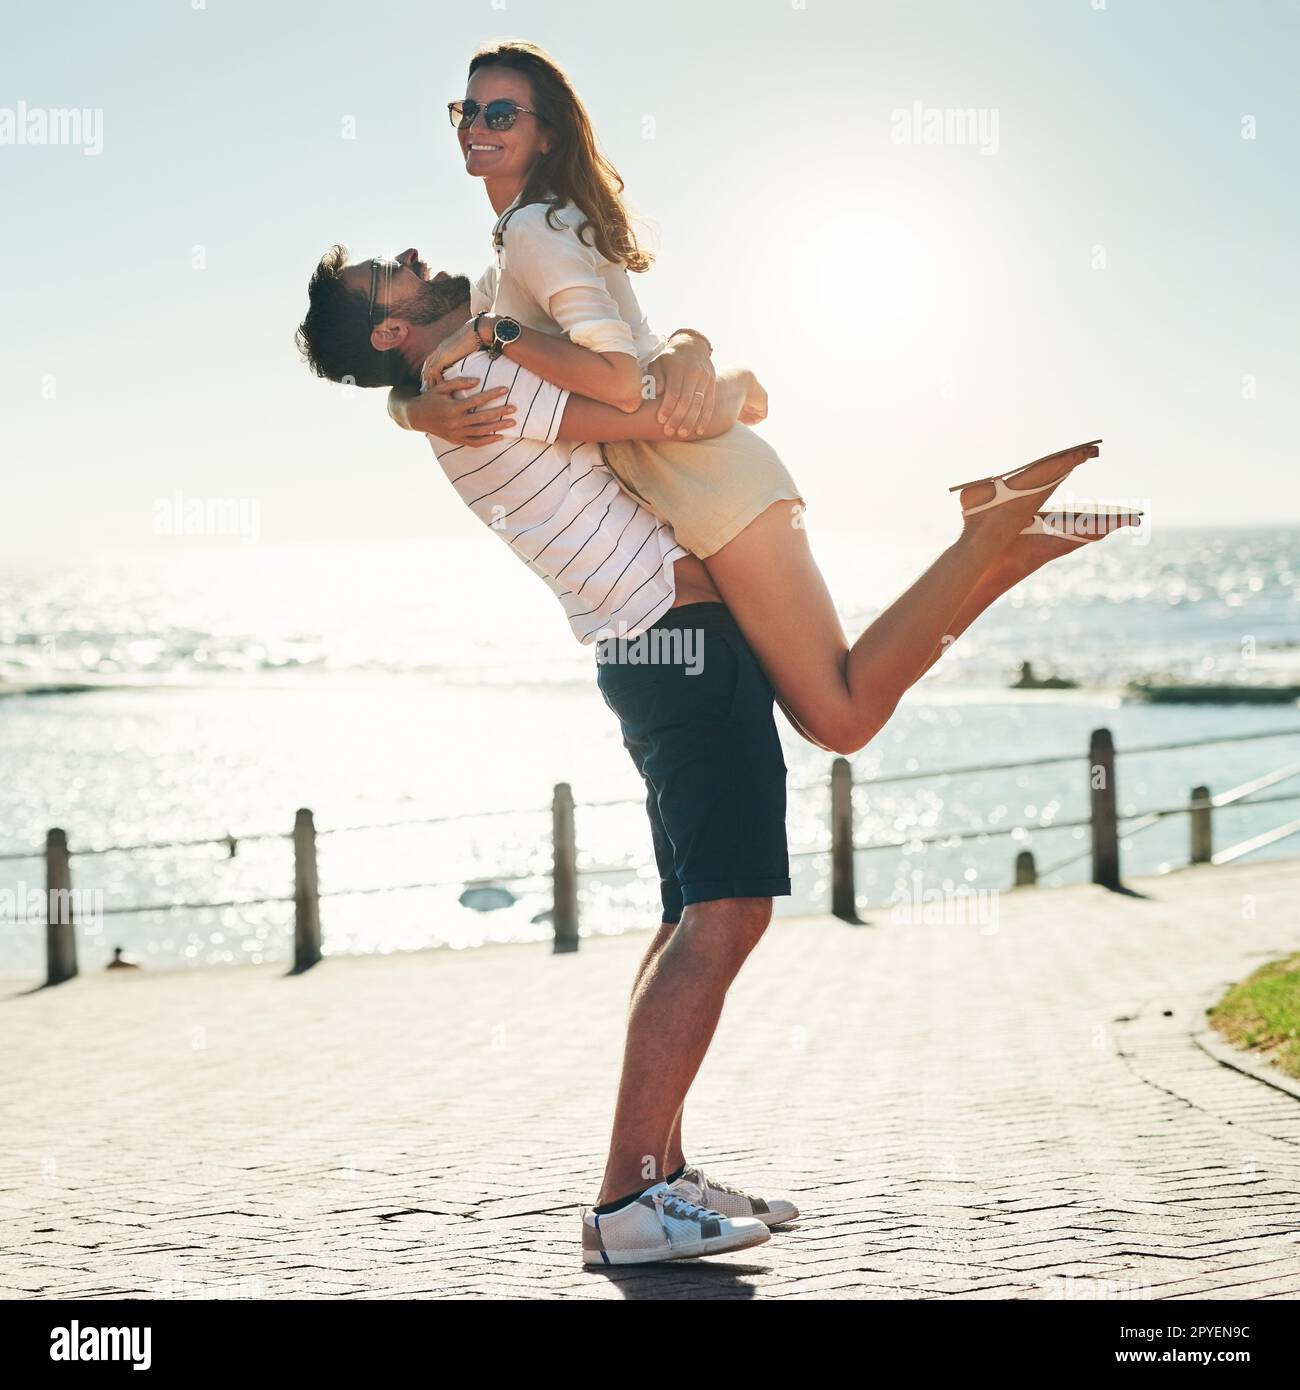 Summer romance goals. Full length shot of a happy young couple embracing on a summers day outdoors. Stock Photo